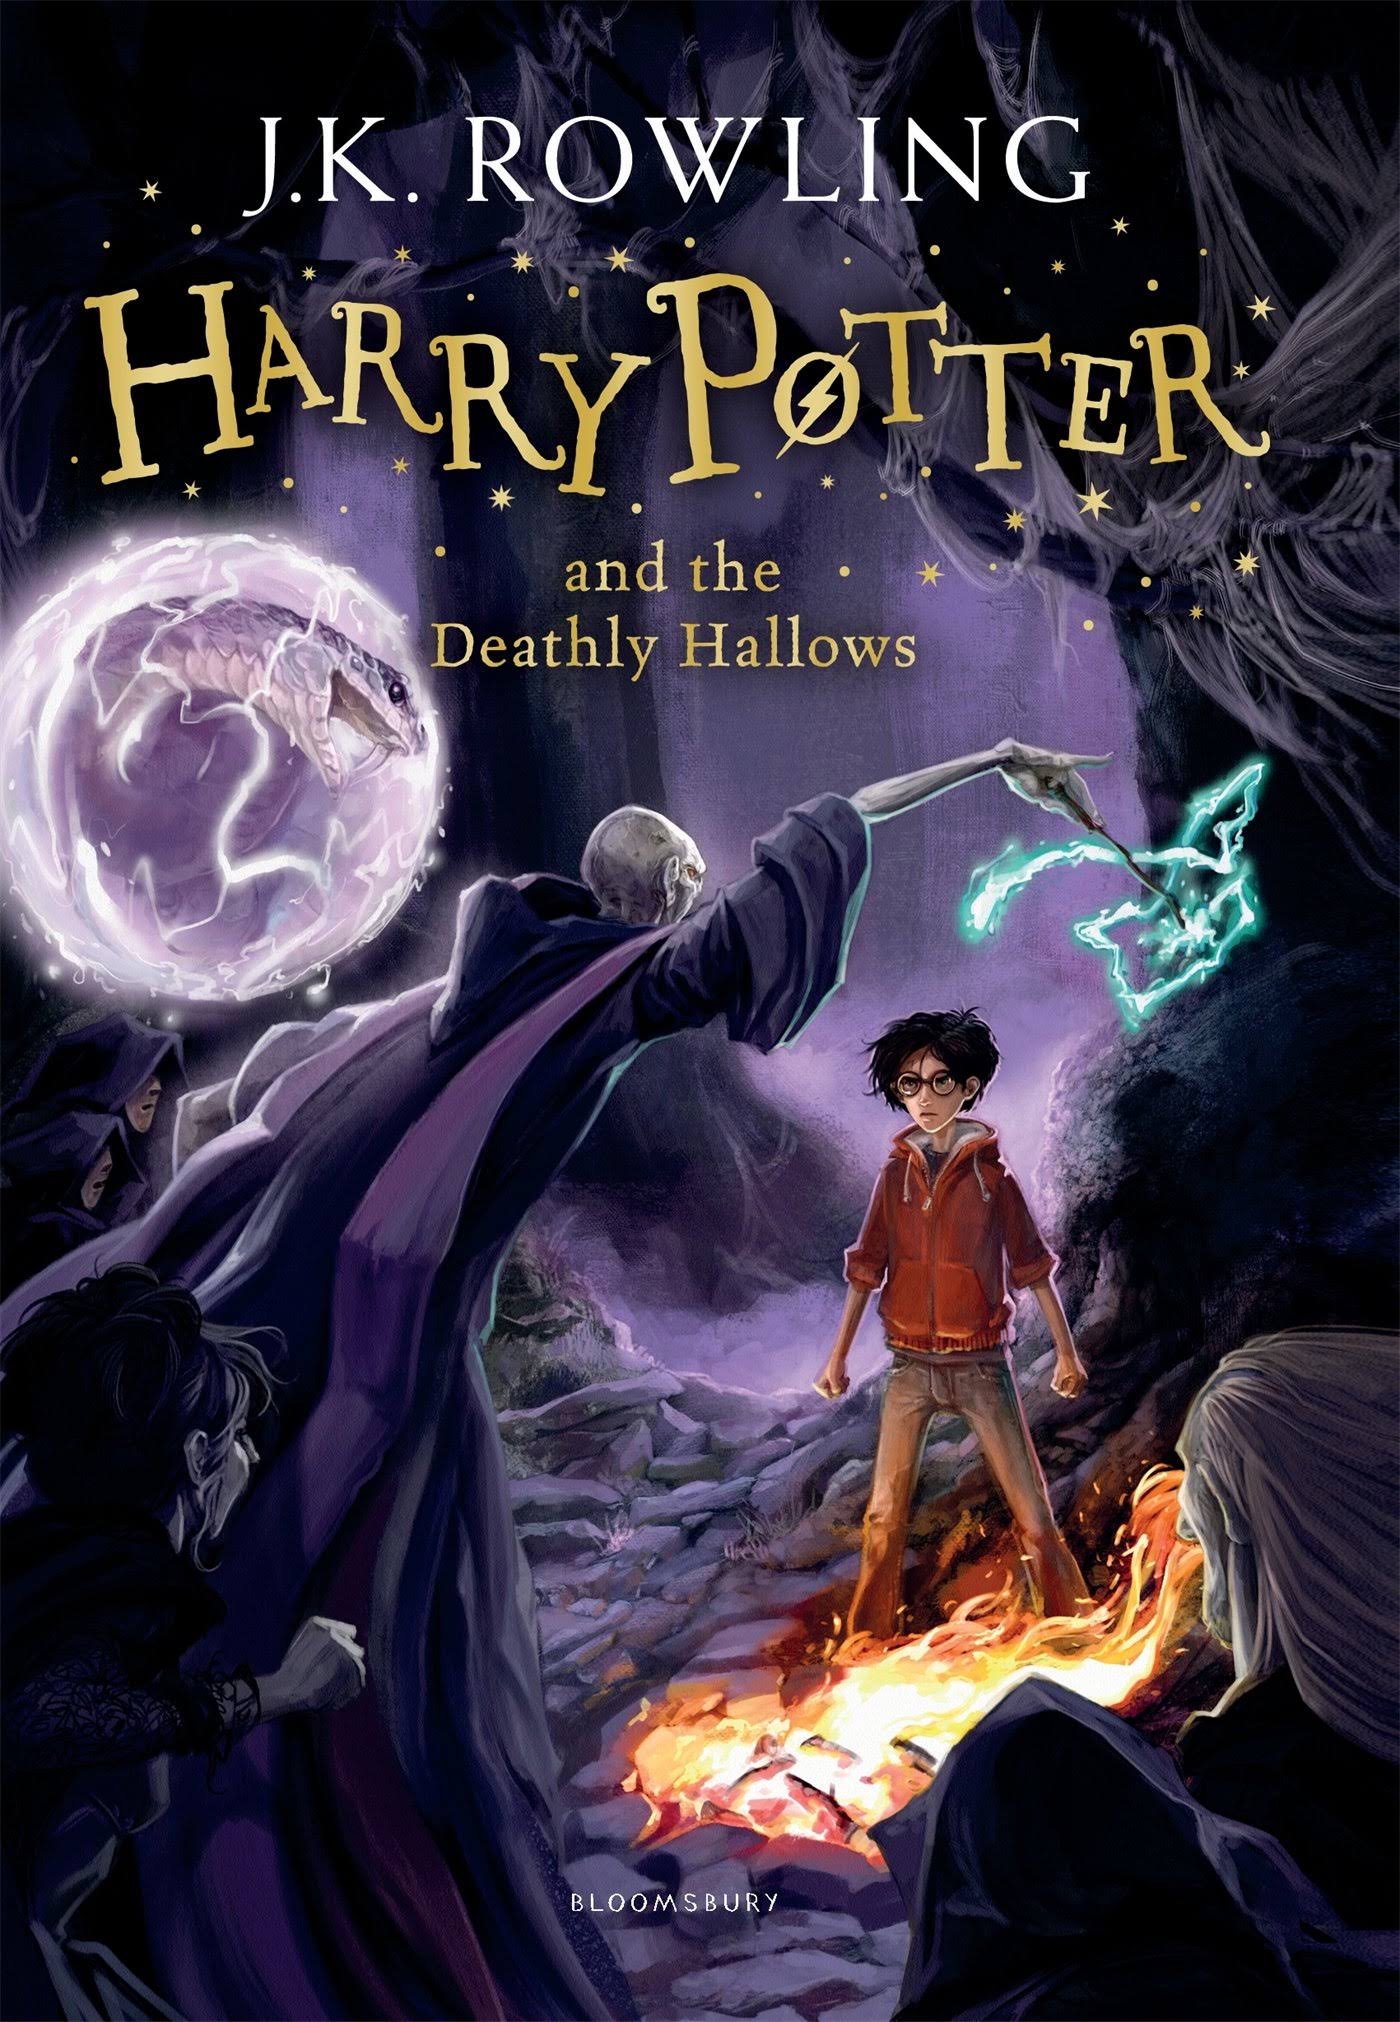 Harry Potter and the Deathly Hallows [Book]